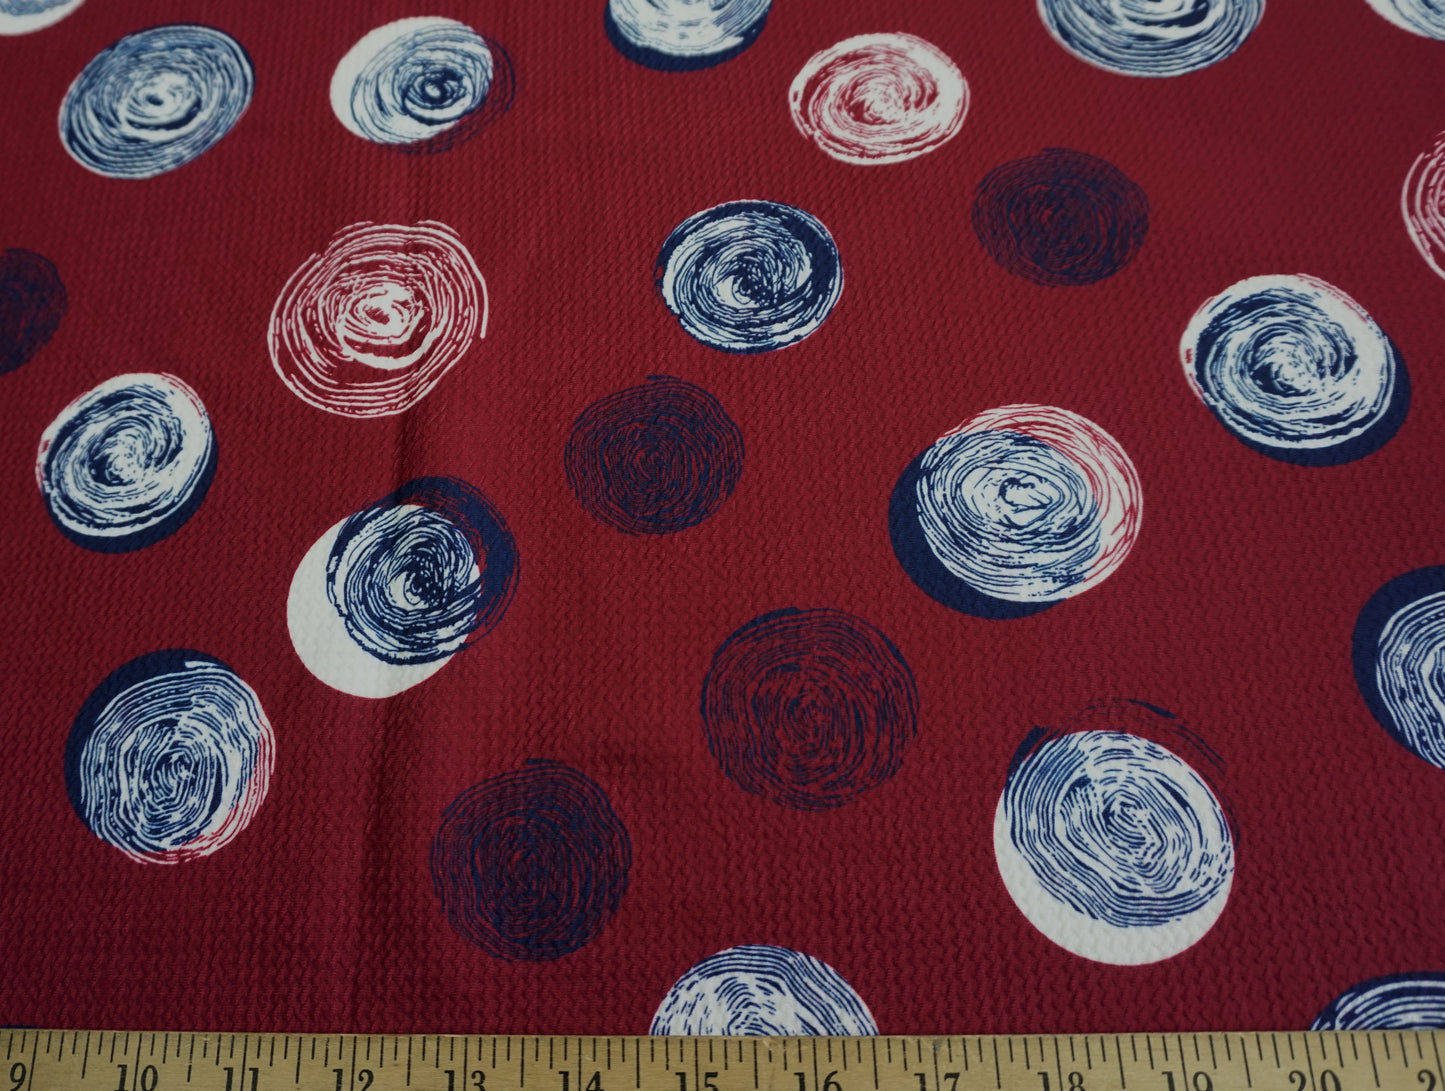 Bullet Knit Printed Fabric-Burgundy White Blue Fingerprints-BPR086-Sold by the Yard